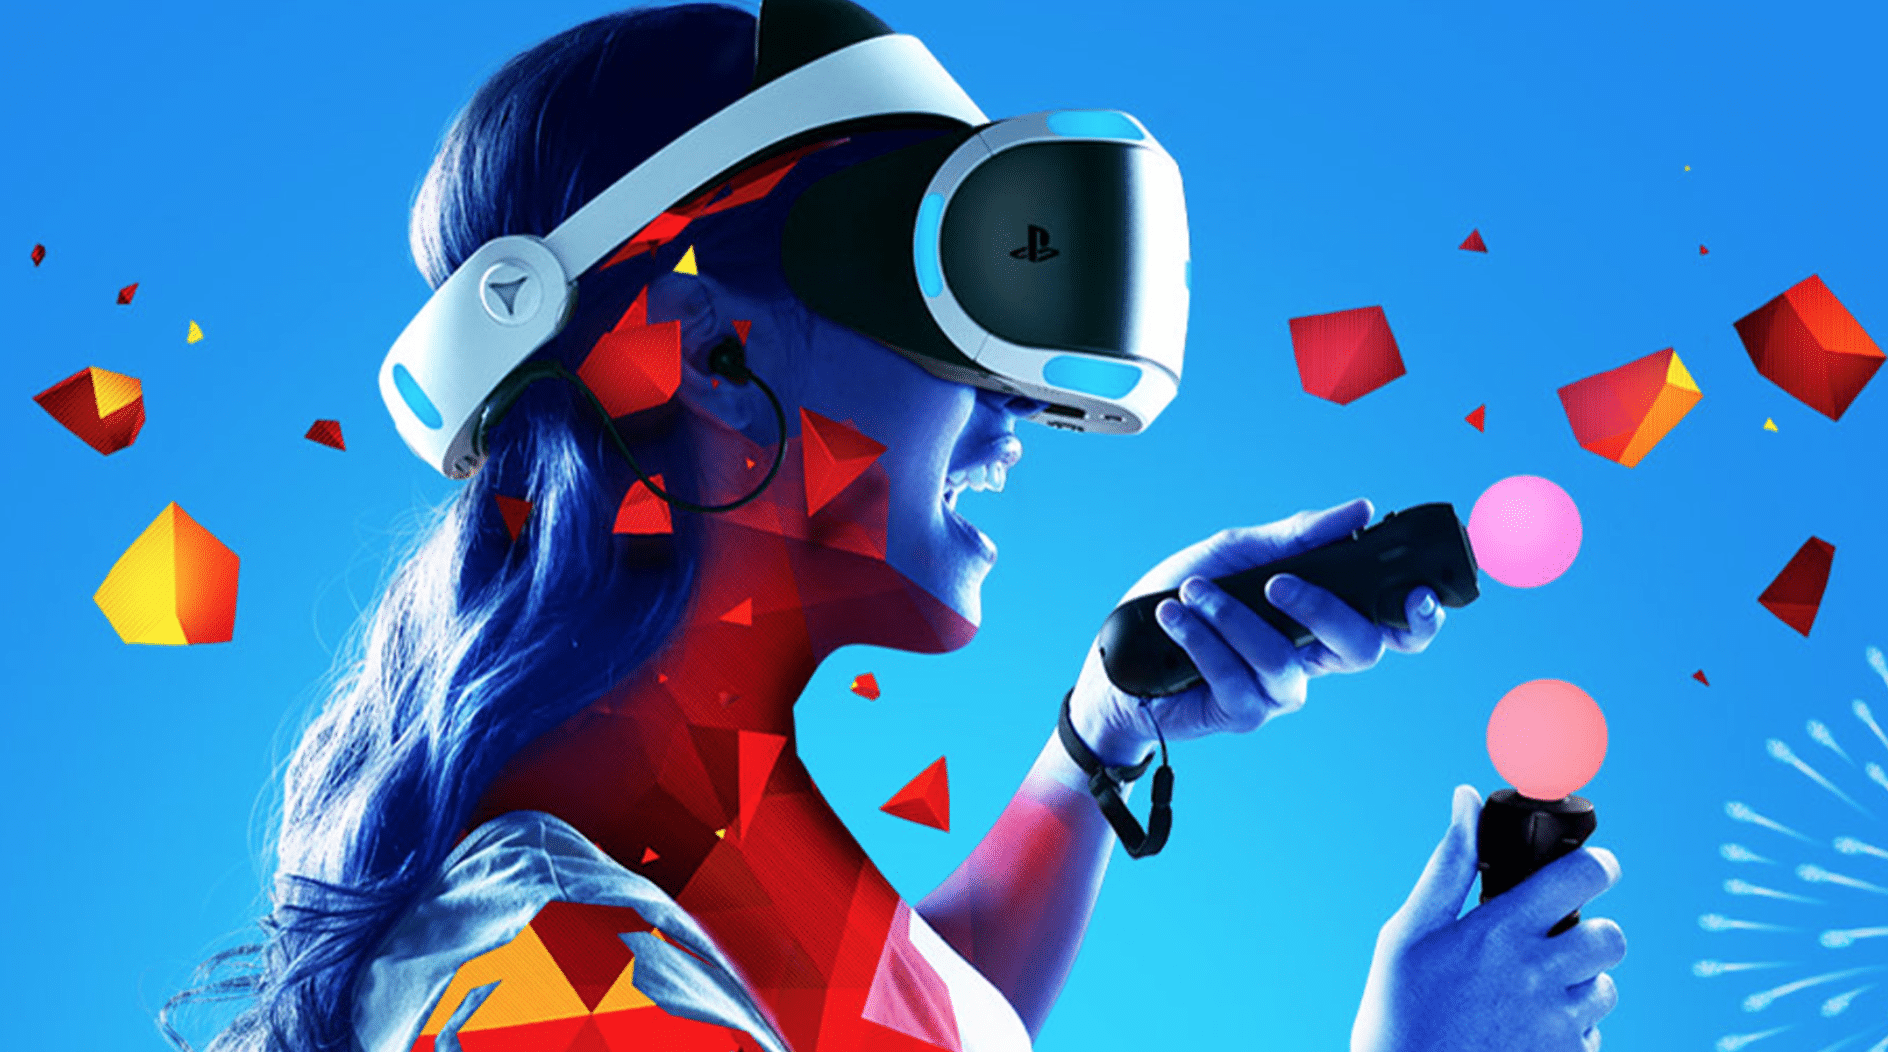 PSVR 2: price, release date, specs, games – everything you need to know